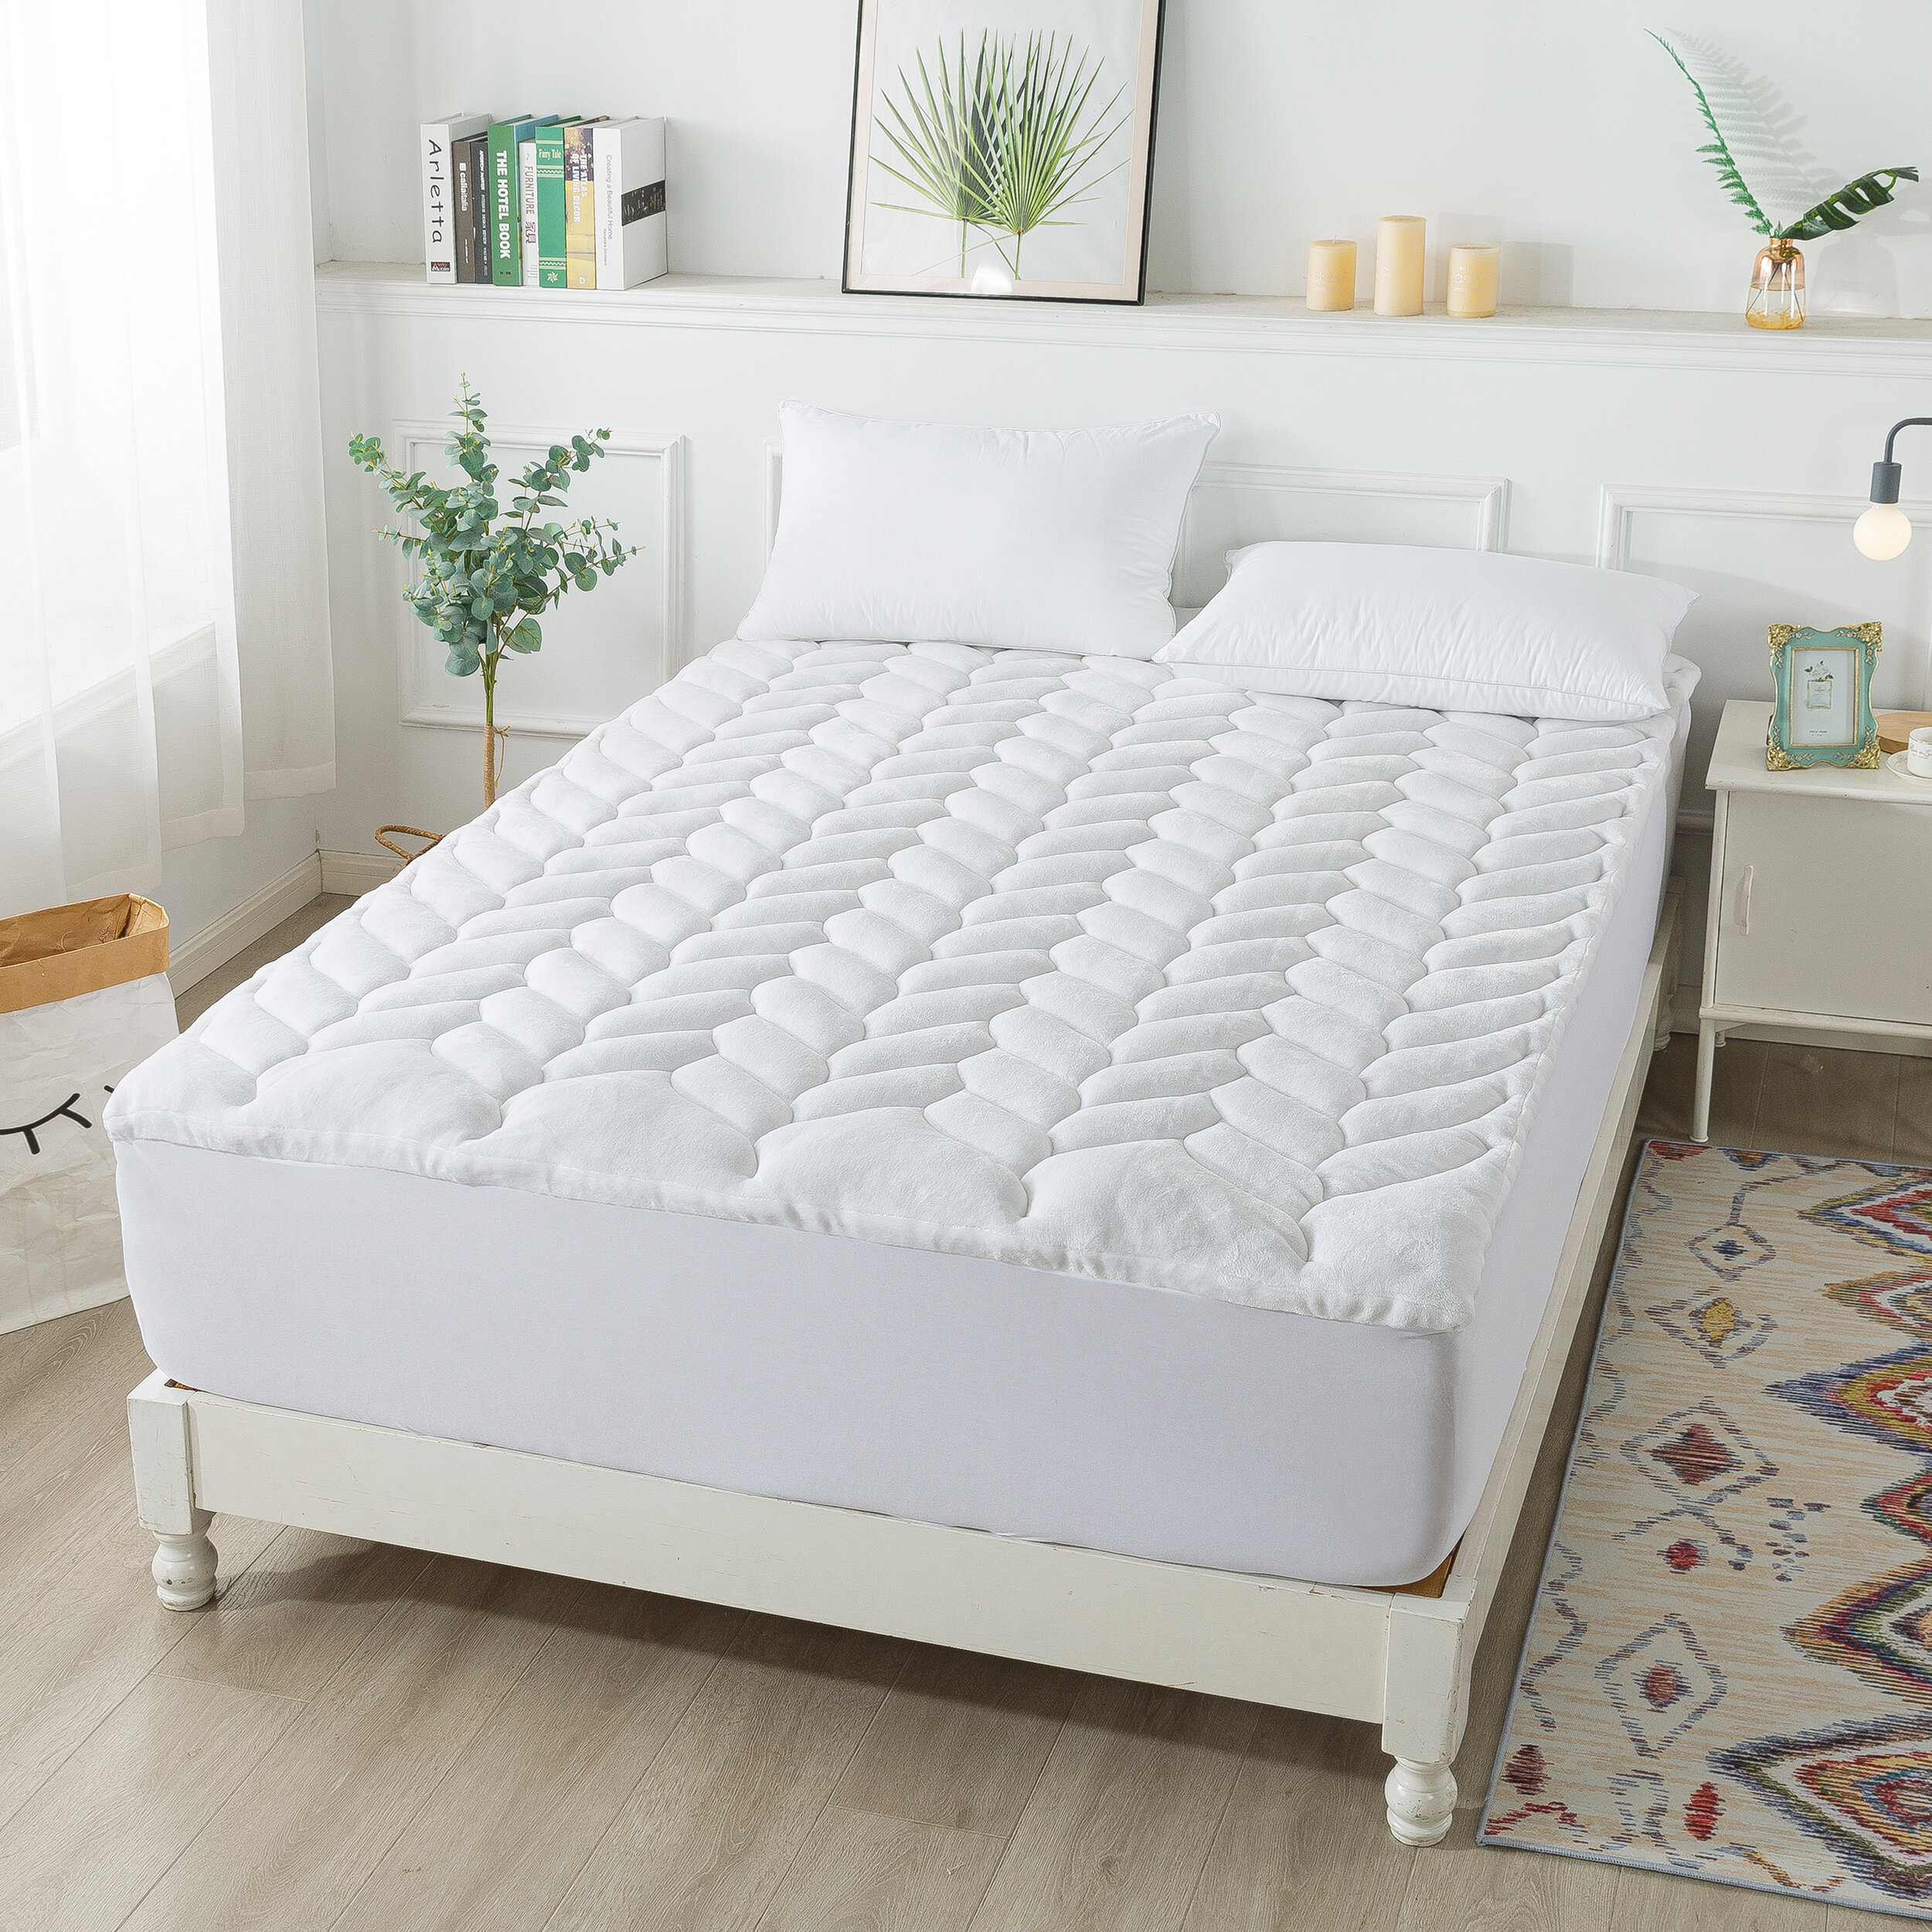 1-Inch Medium Firm Foam Toppers with Convoluted Egg Shell Design, Provide Proper Back Support Alwyn Home Bed Size: Full